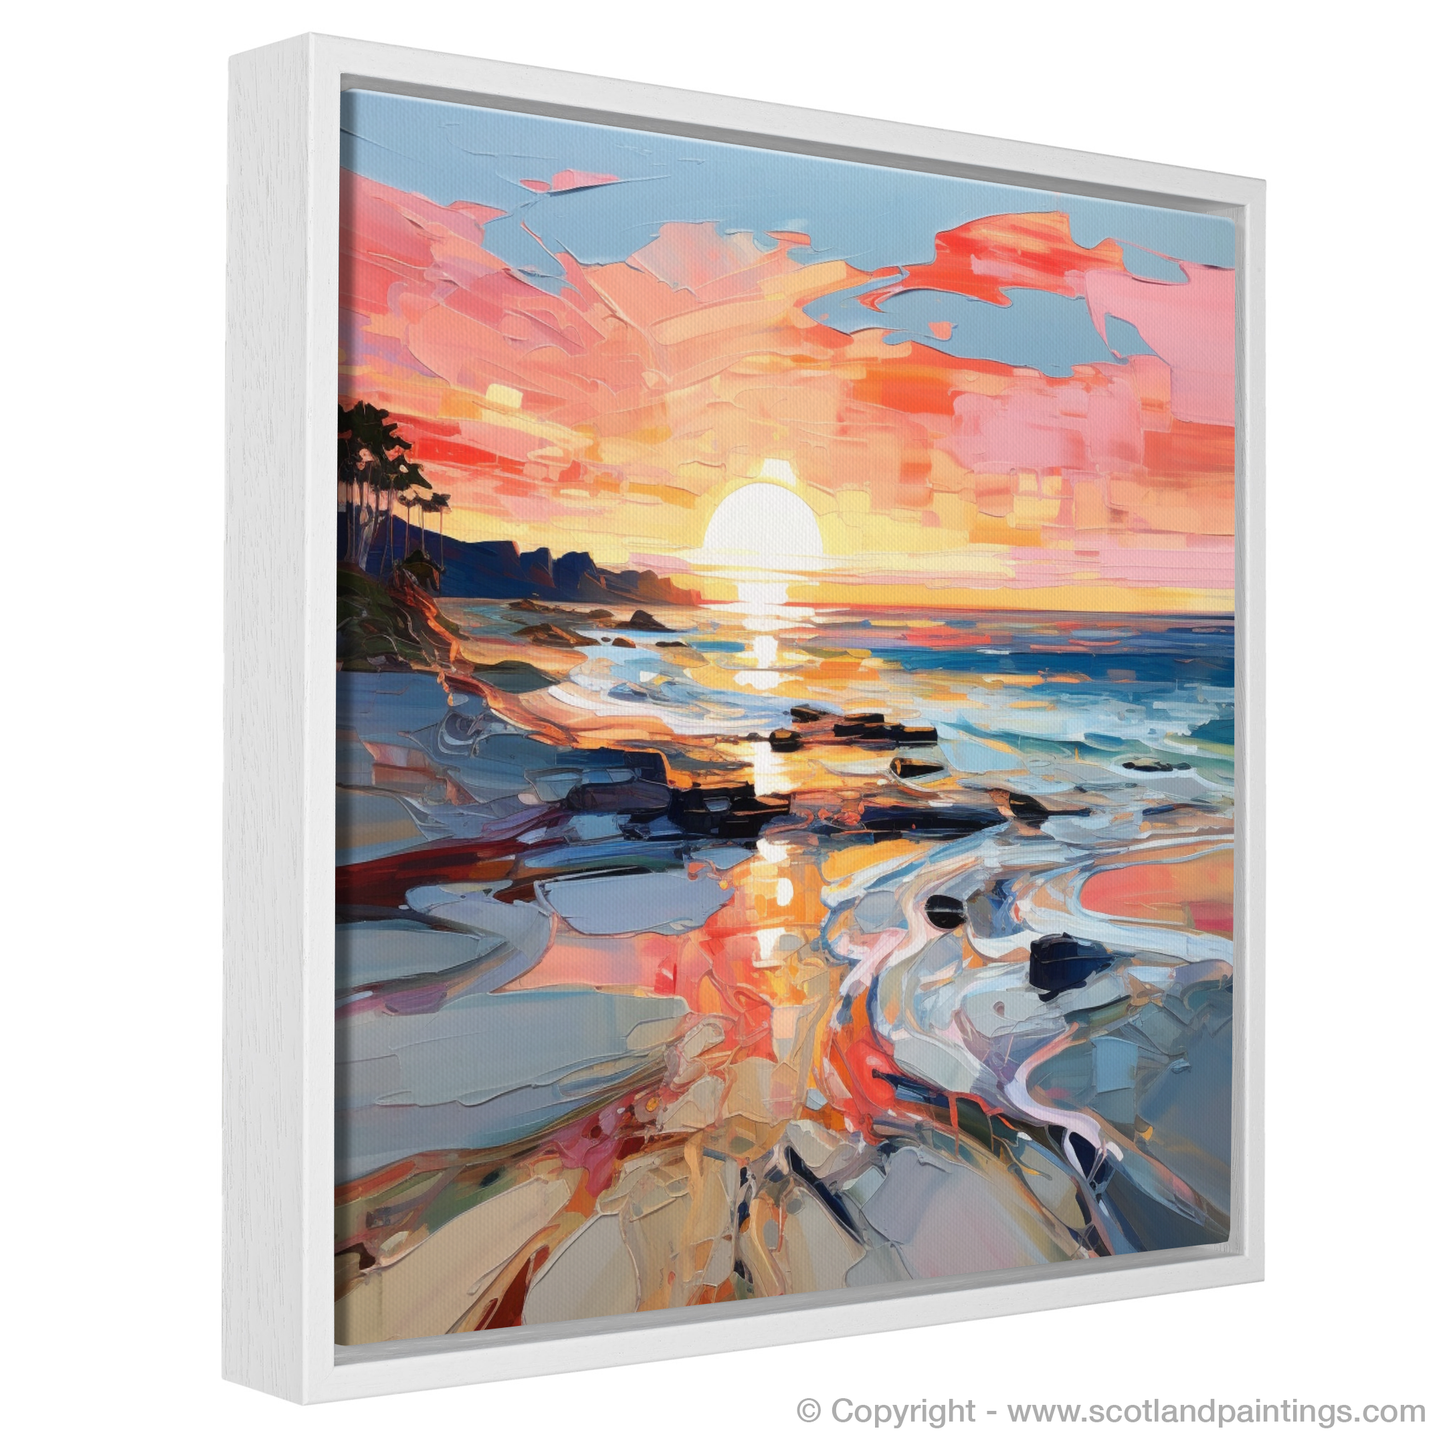 Painting and Art Print of Coral Beach at sunset entitled "Sunset Embrace at Coral Beach".